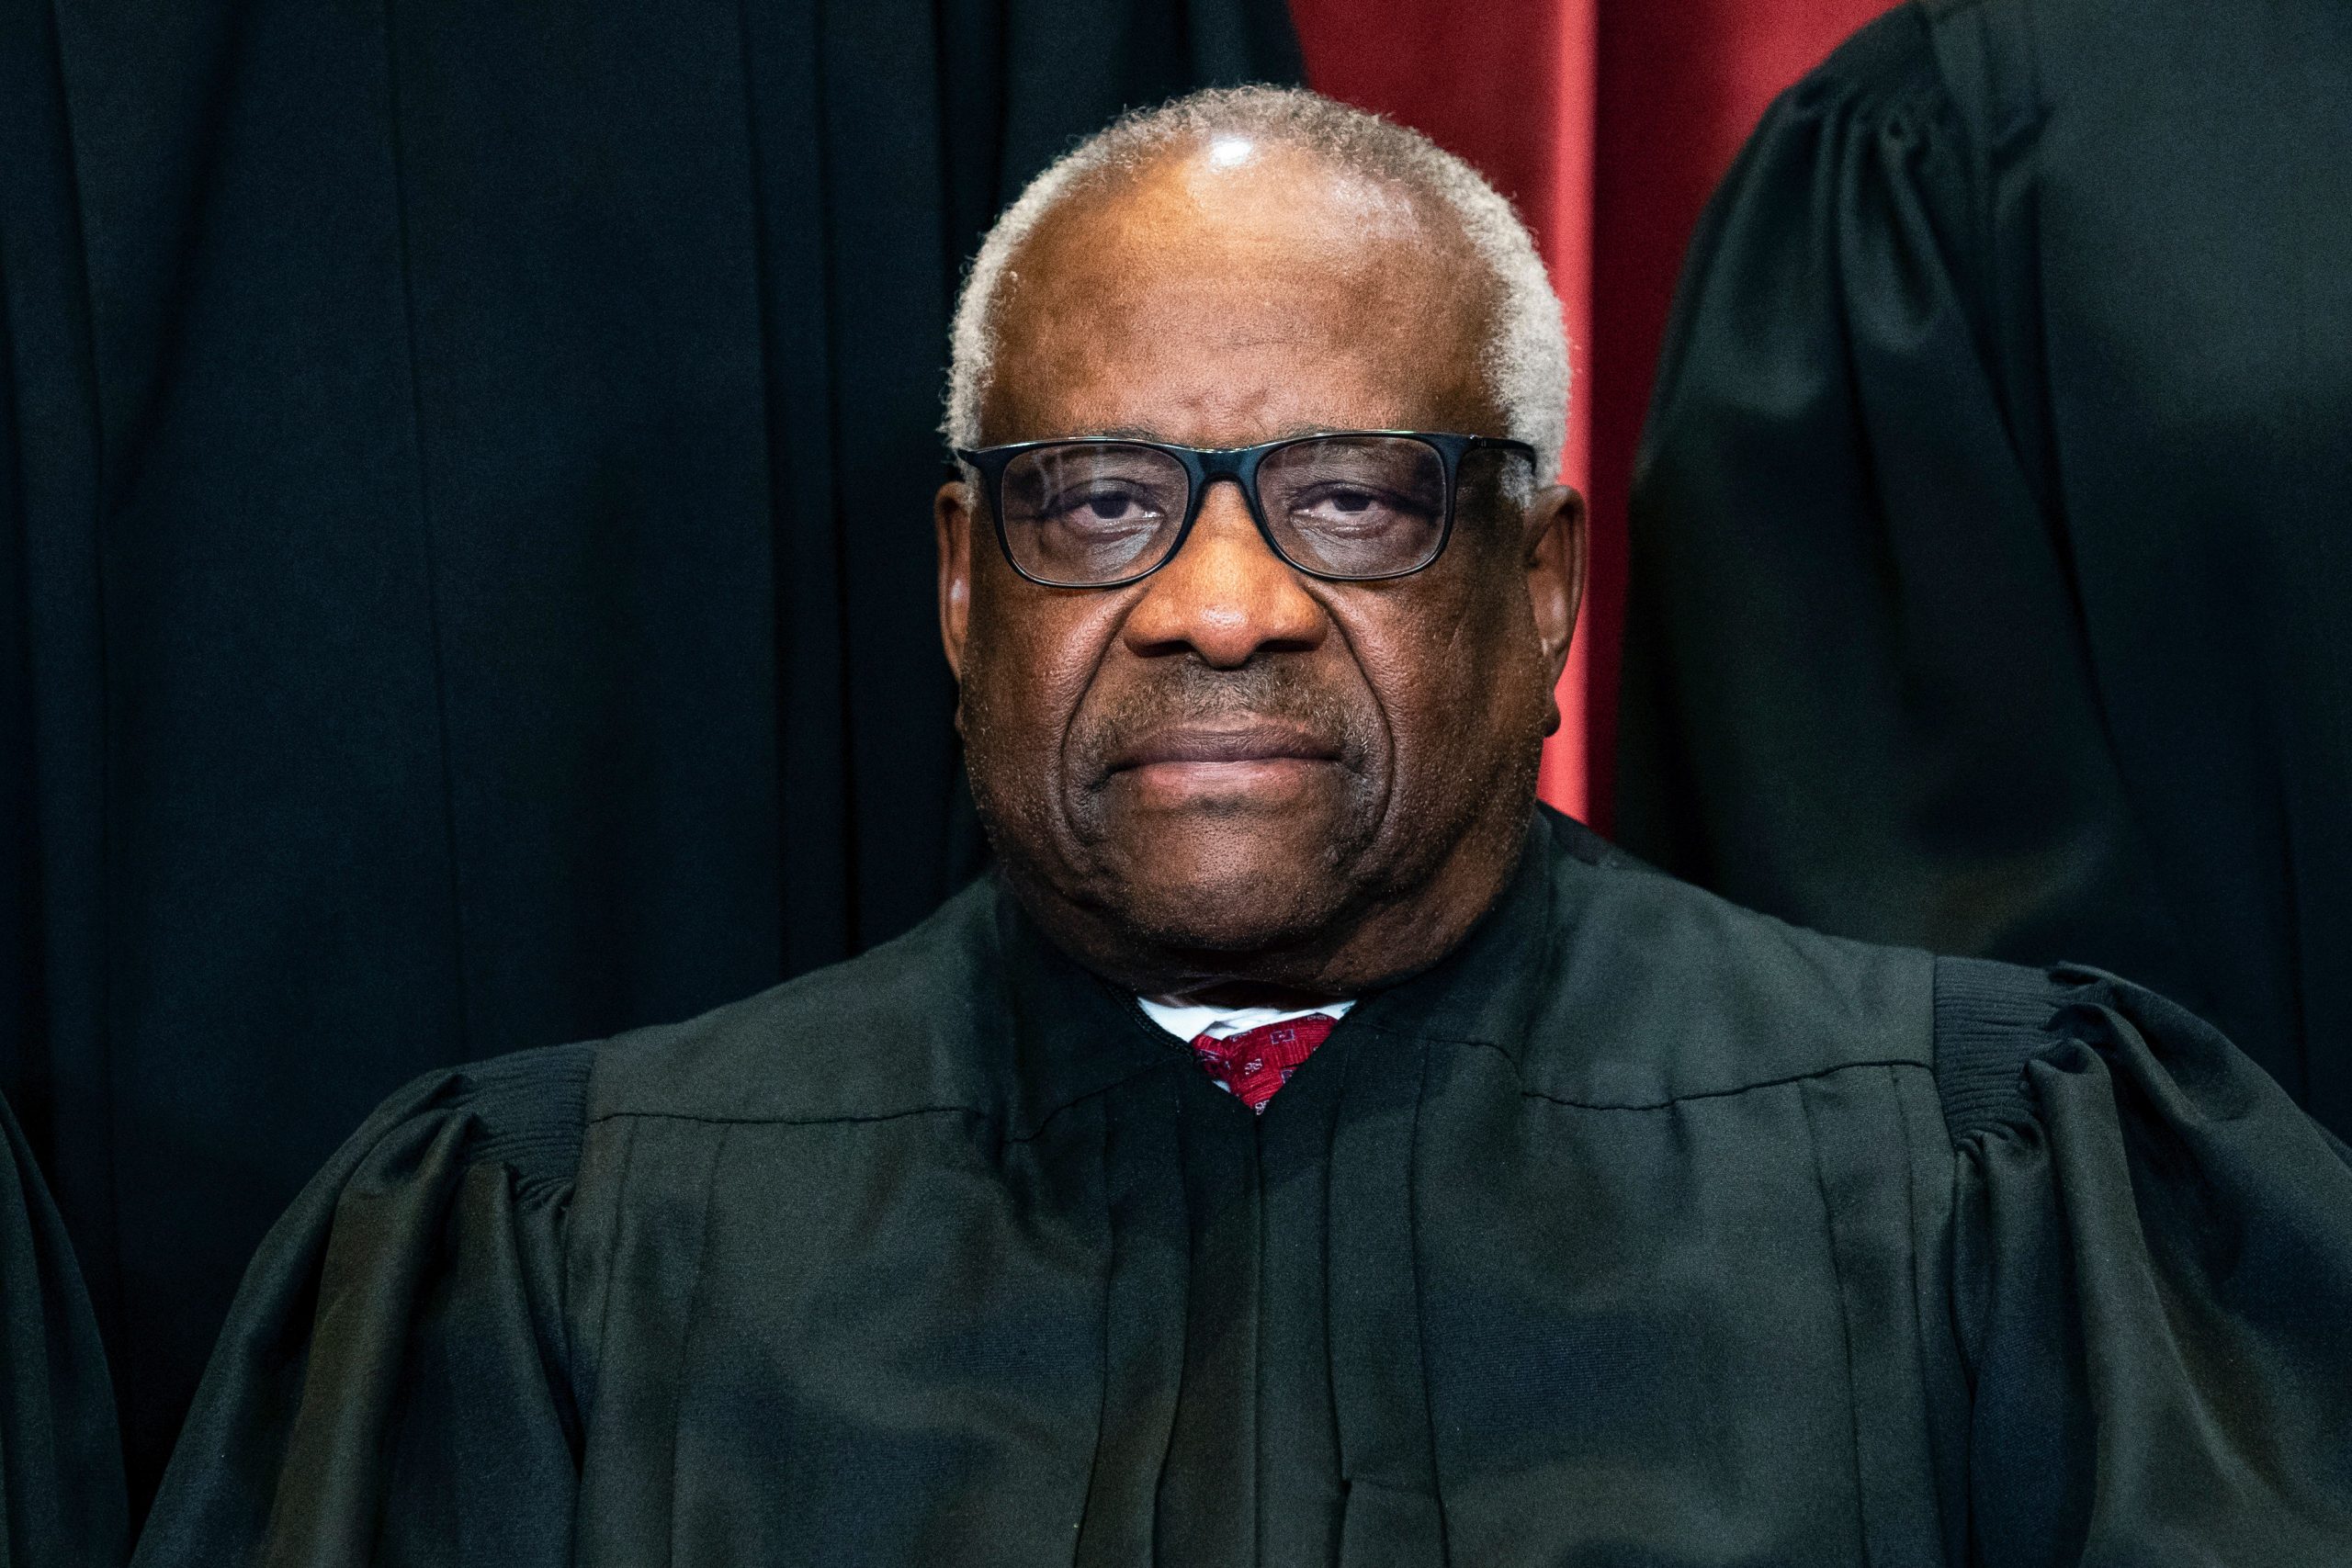 Justice Clarence Thomas hospitalised for infection: US Supreme Court